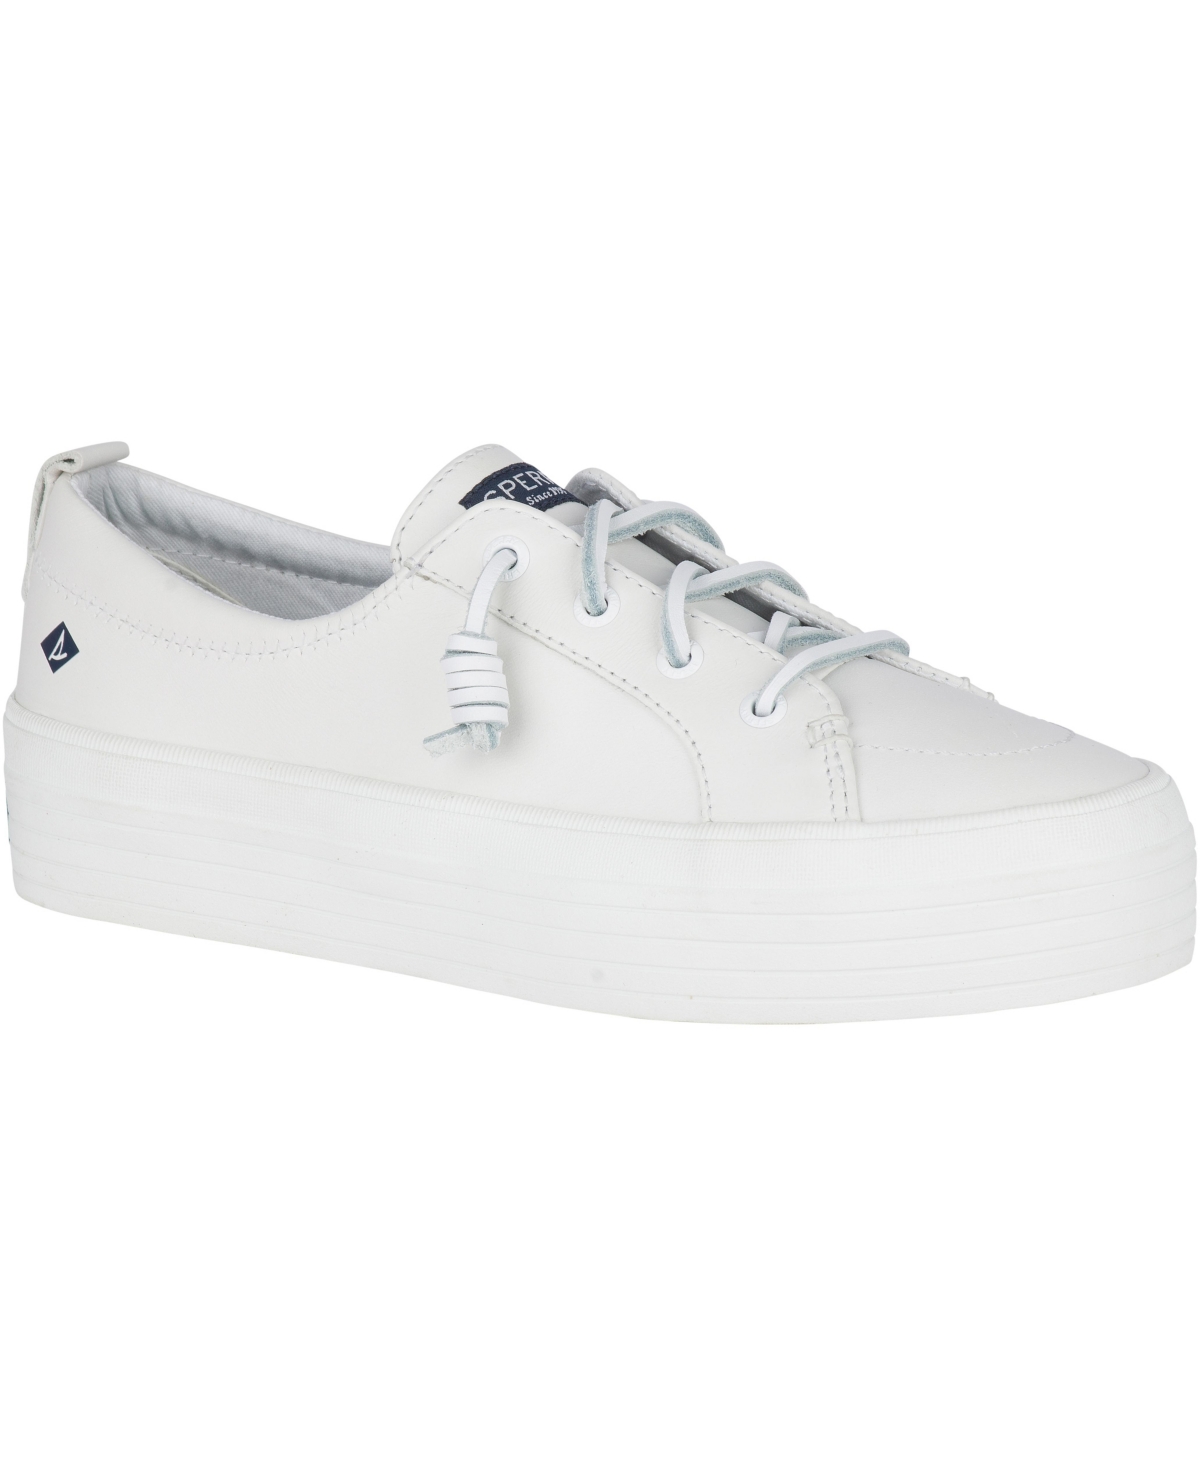 SPERRY WOMEN'S CREST VIBE PLATFORM LEATHER SNEAKERS WOMEN'S SHOES 